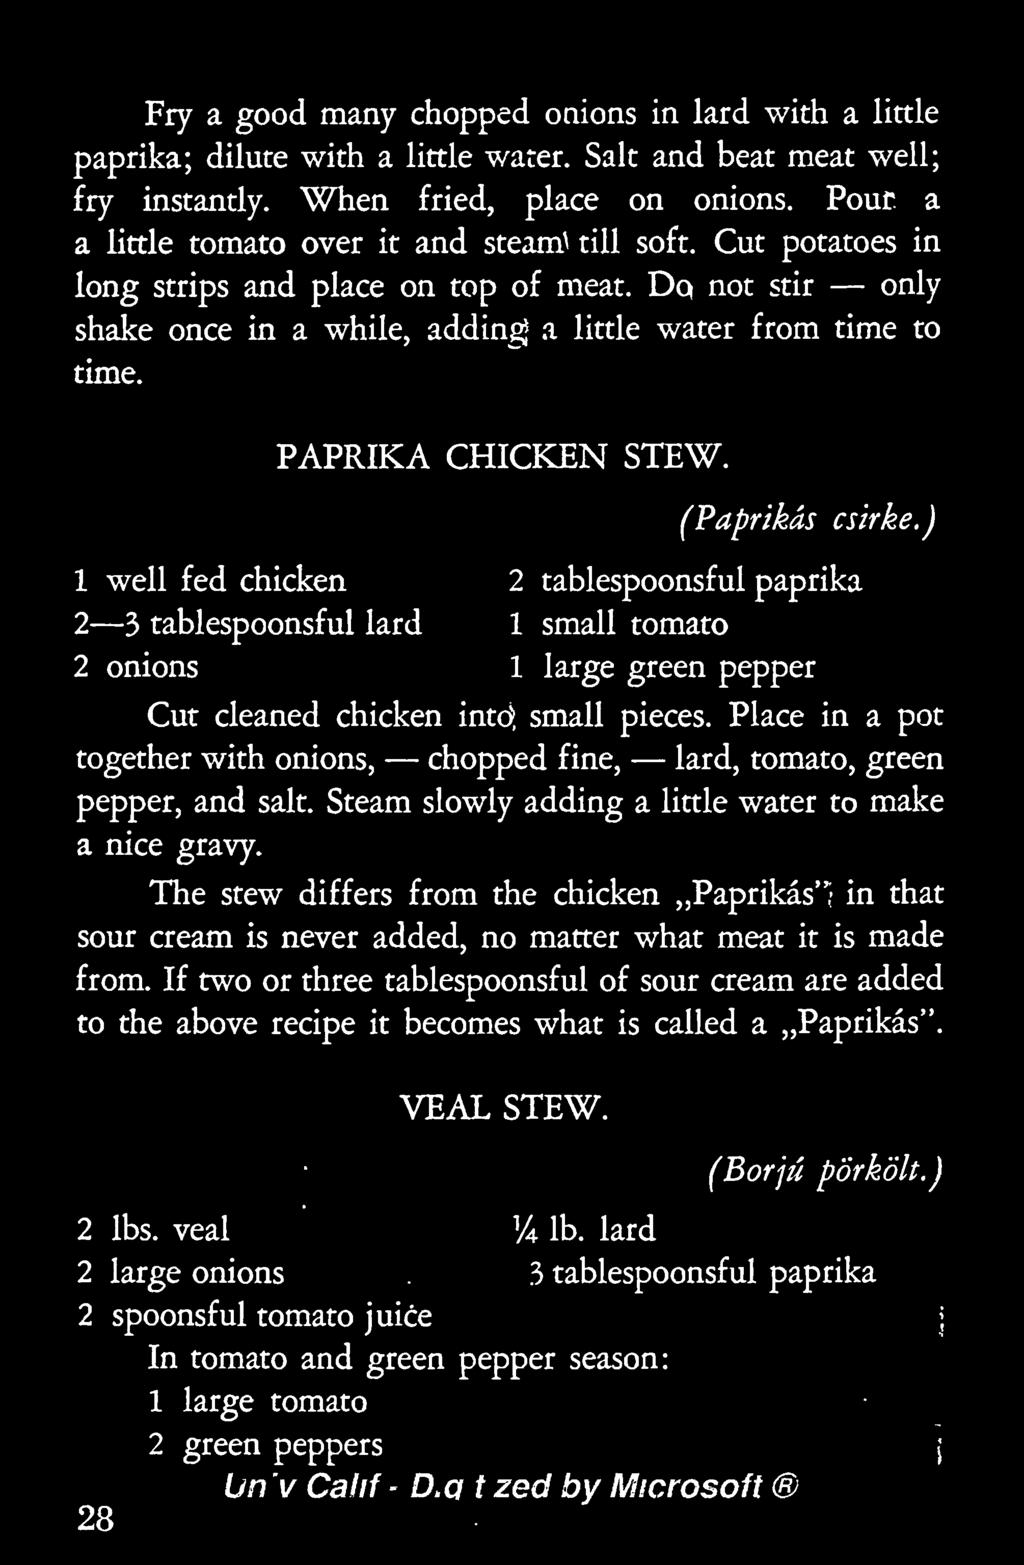 PAPRIKA CHICKEN STEW. (Paprikas csirke.) 1 well fed chicken 2 tablespoonsf ul paprika 2 3 tablespoonsful lard 1 small tomato 2 onions 1 large green pepper Cut cleaned chicken intd; small pieces.